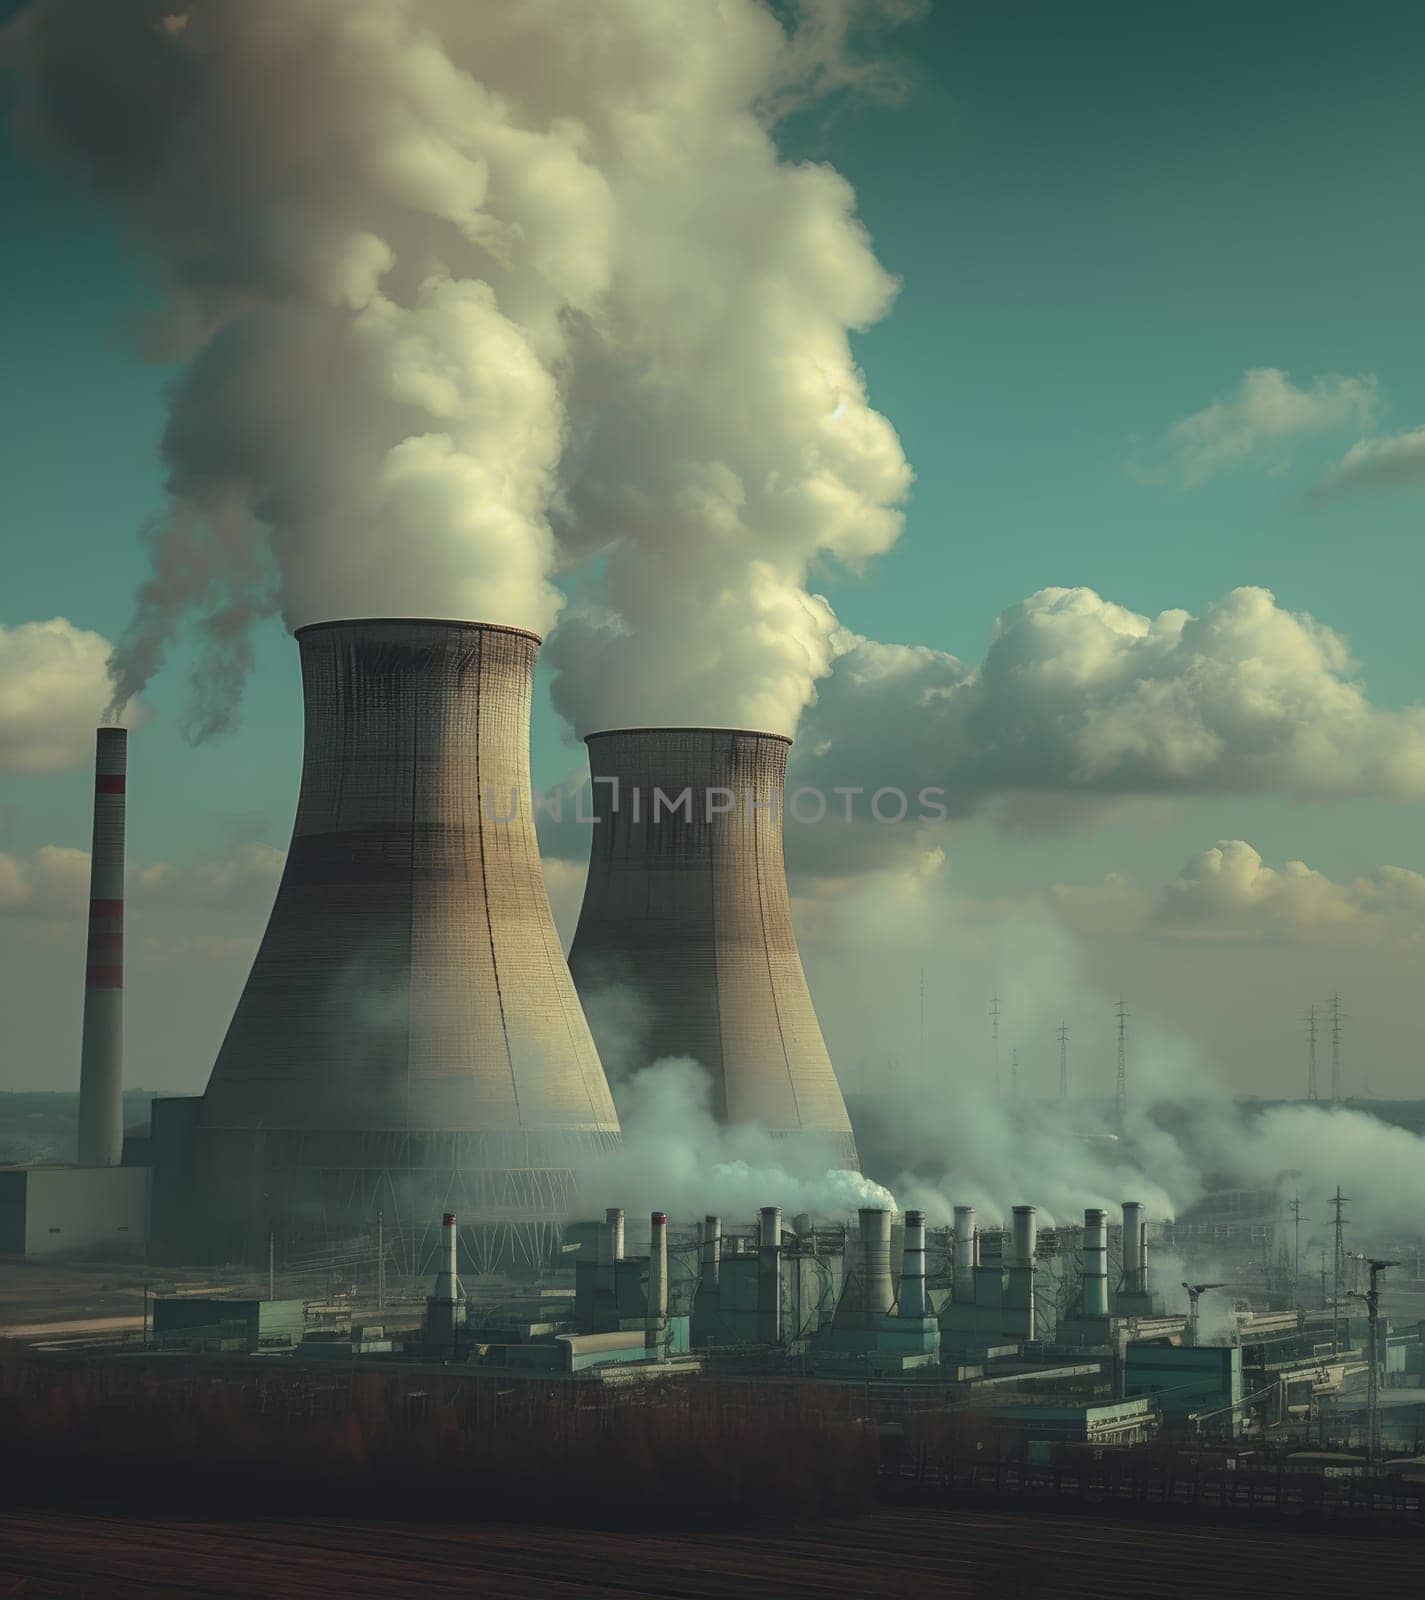 Smoke billows from the cooling towers of a nuclear power plant, a stark symbol of industrial energy production and its environmental impact. by sfinks